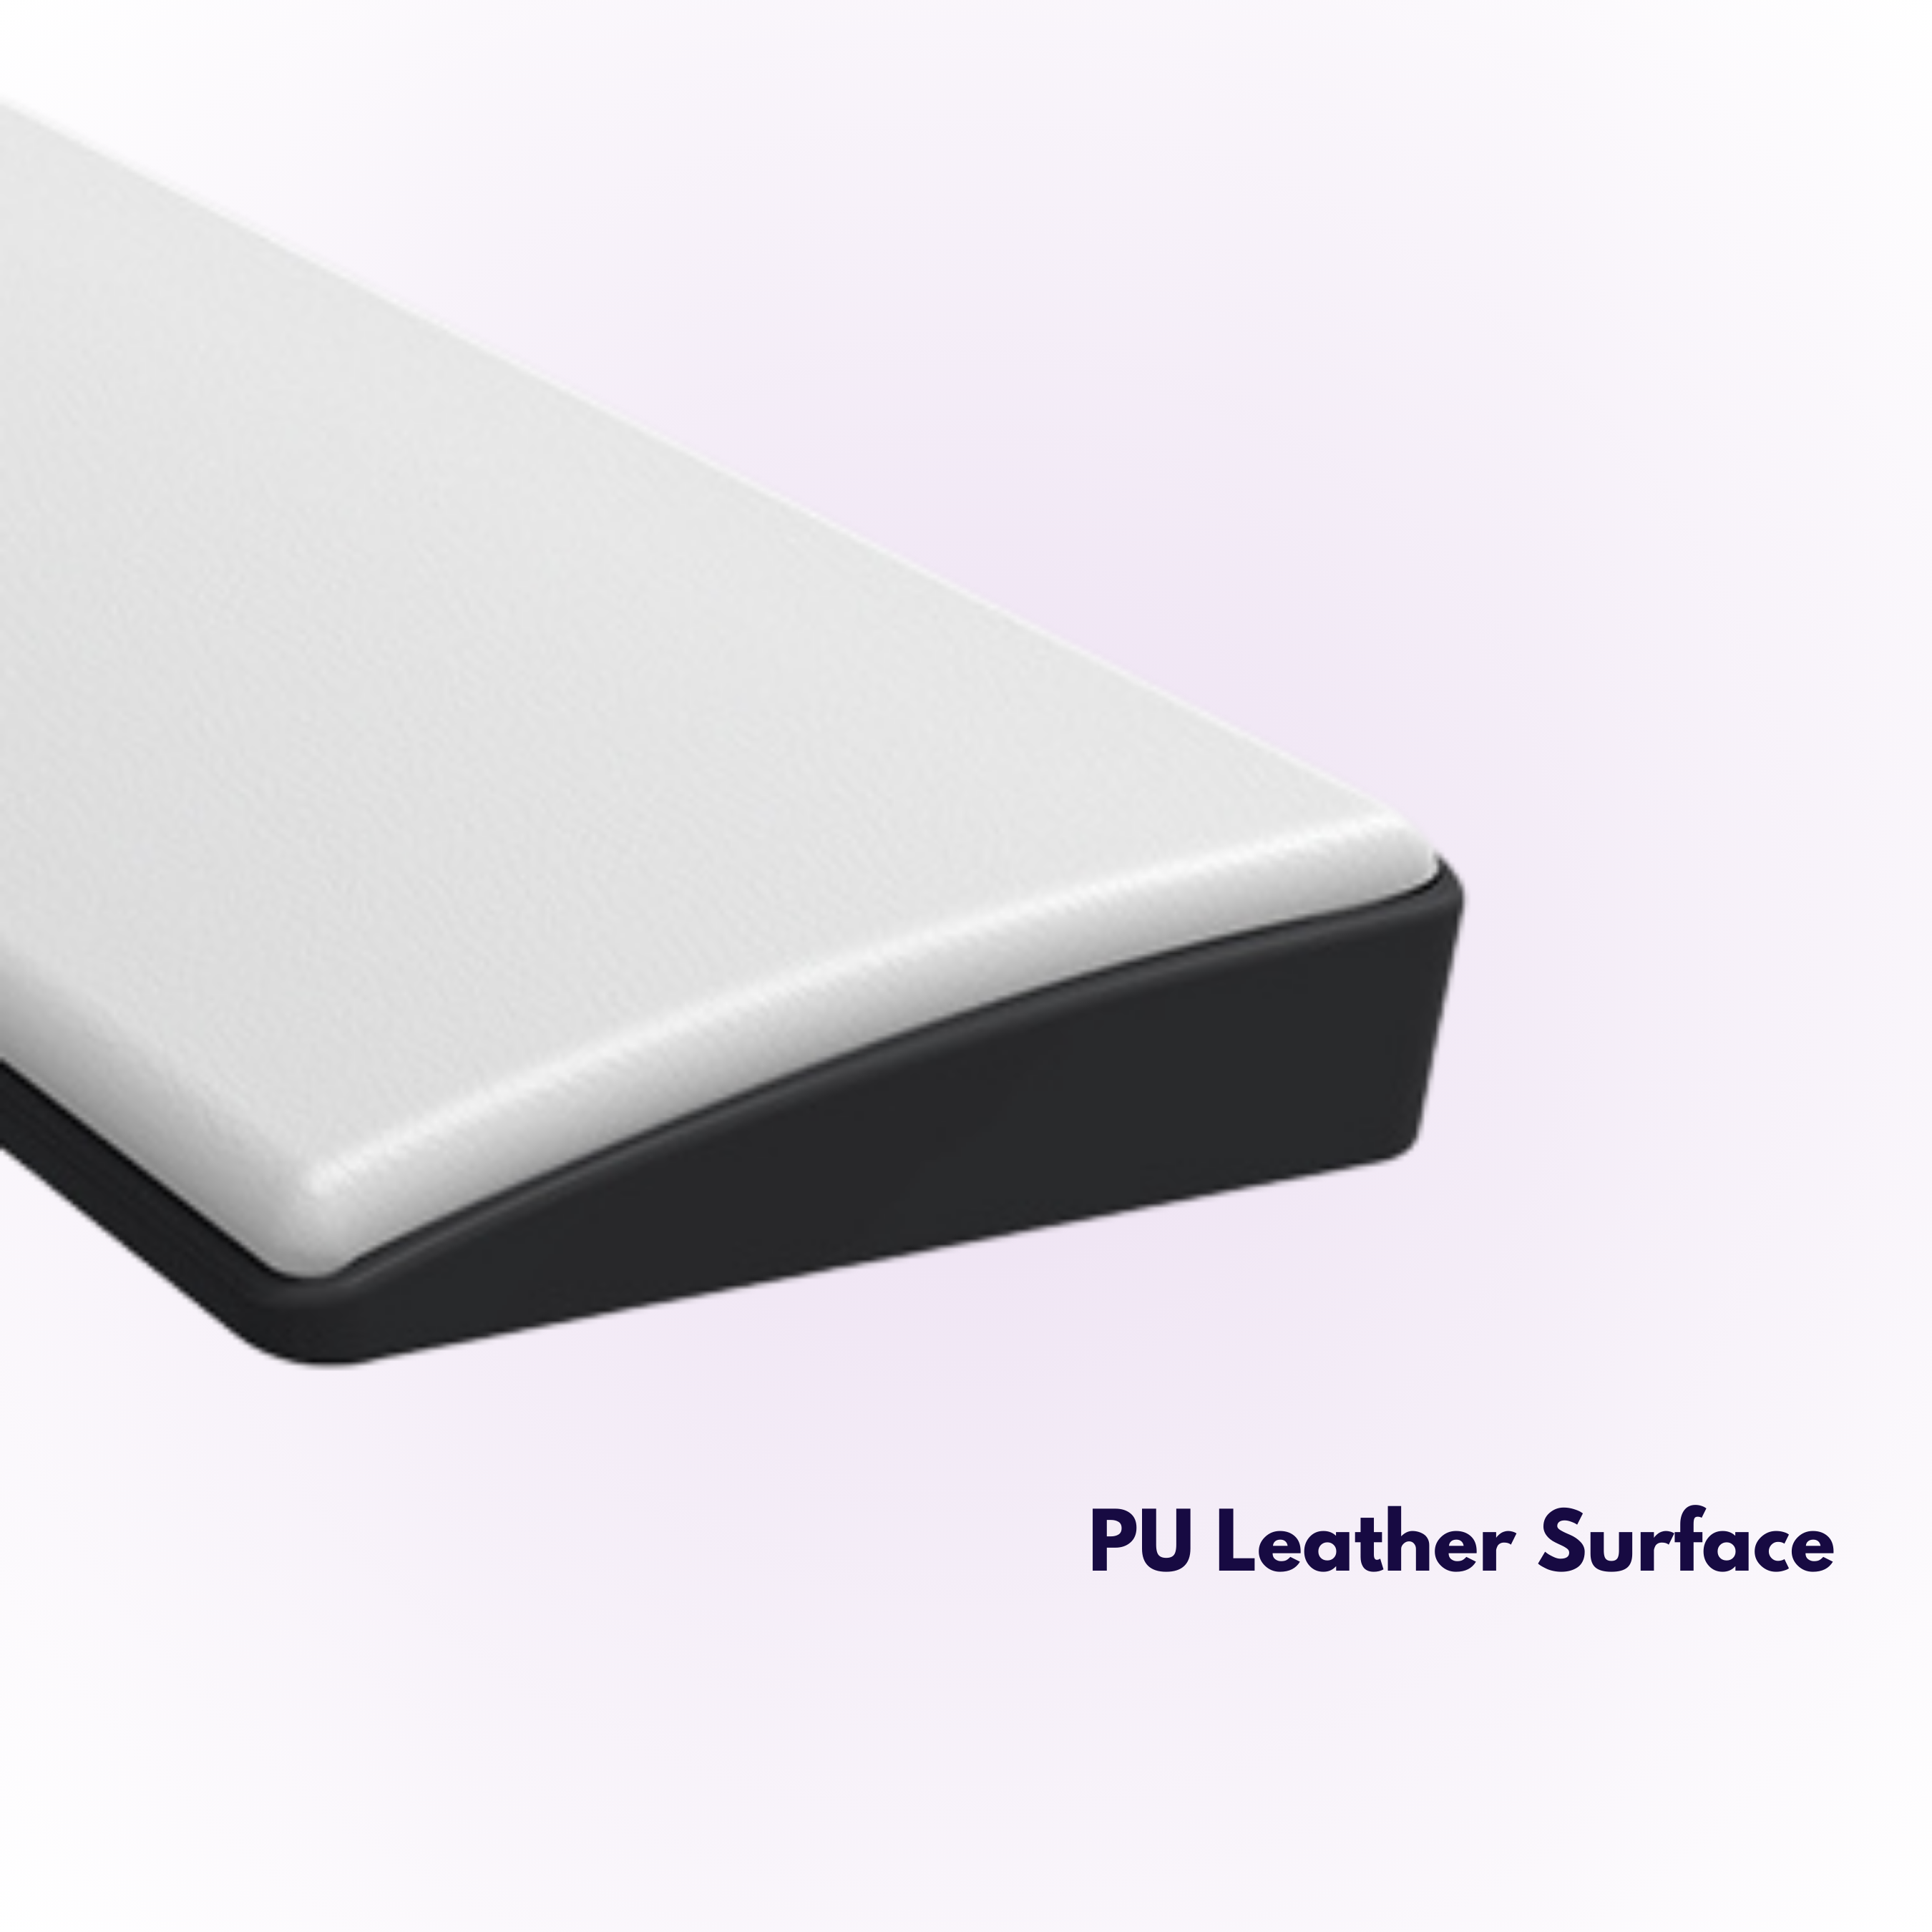 angled white mechanical keyboard wrist rest with a black base showing the PU leather surface